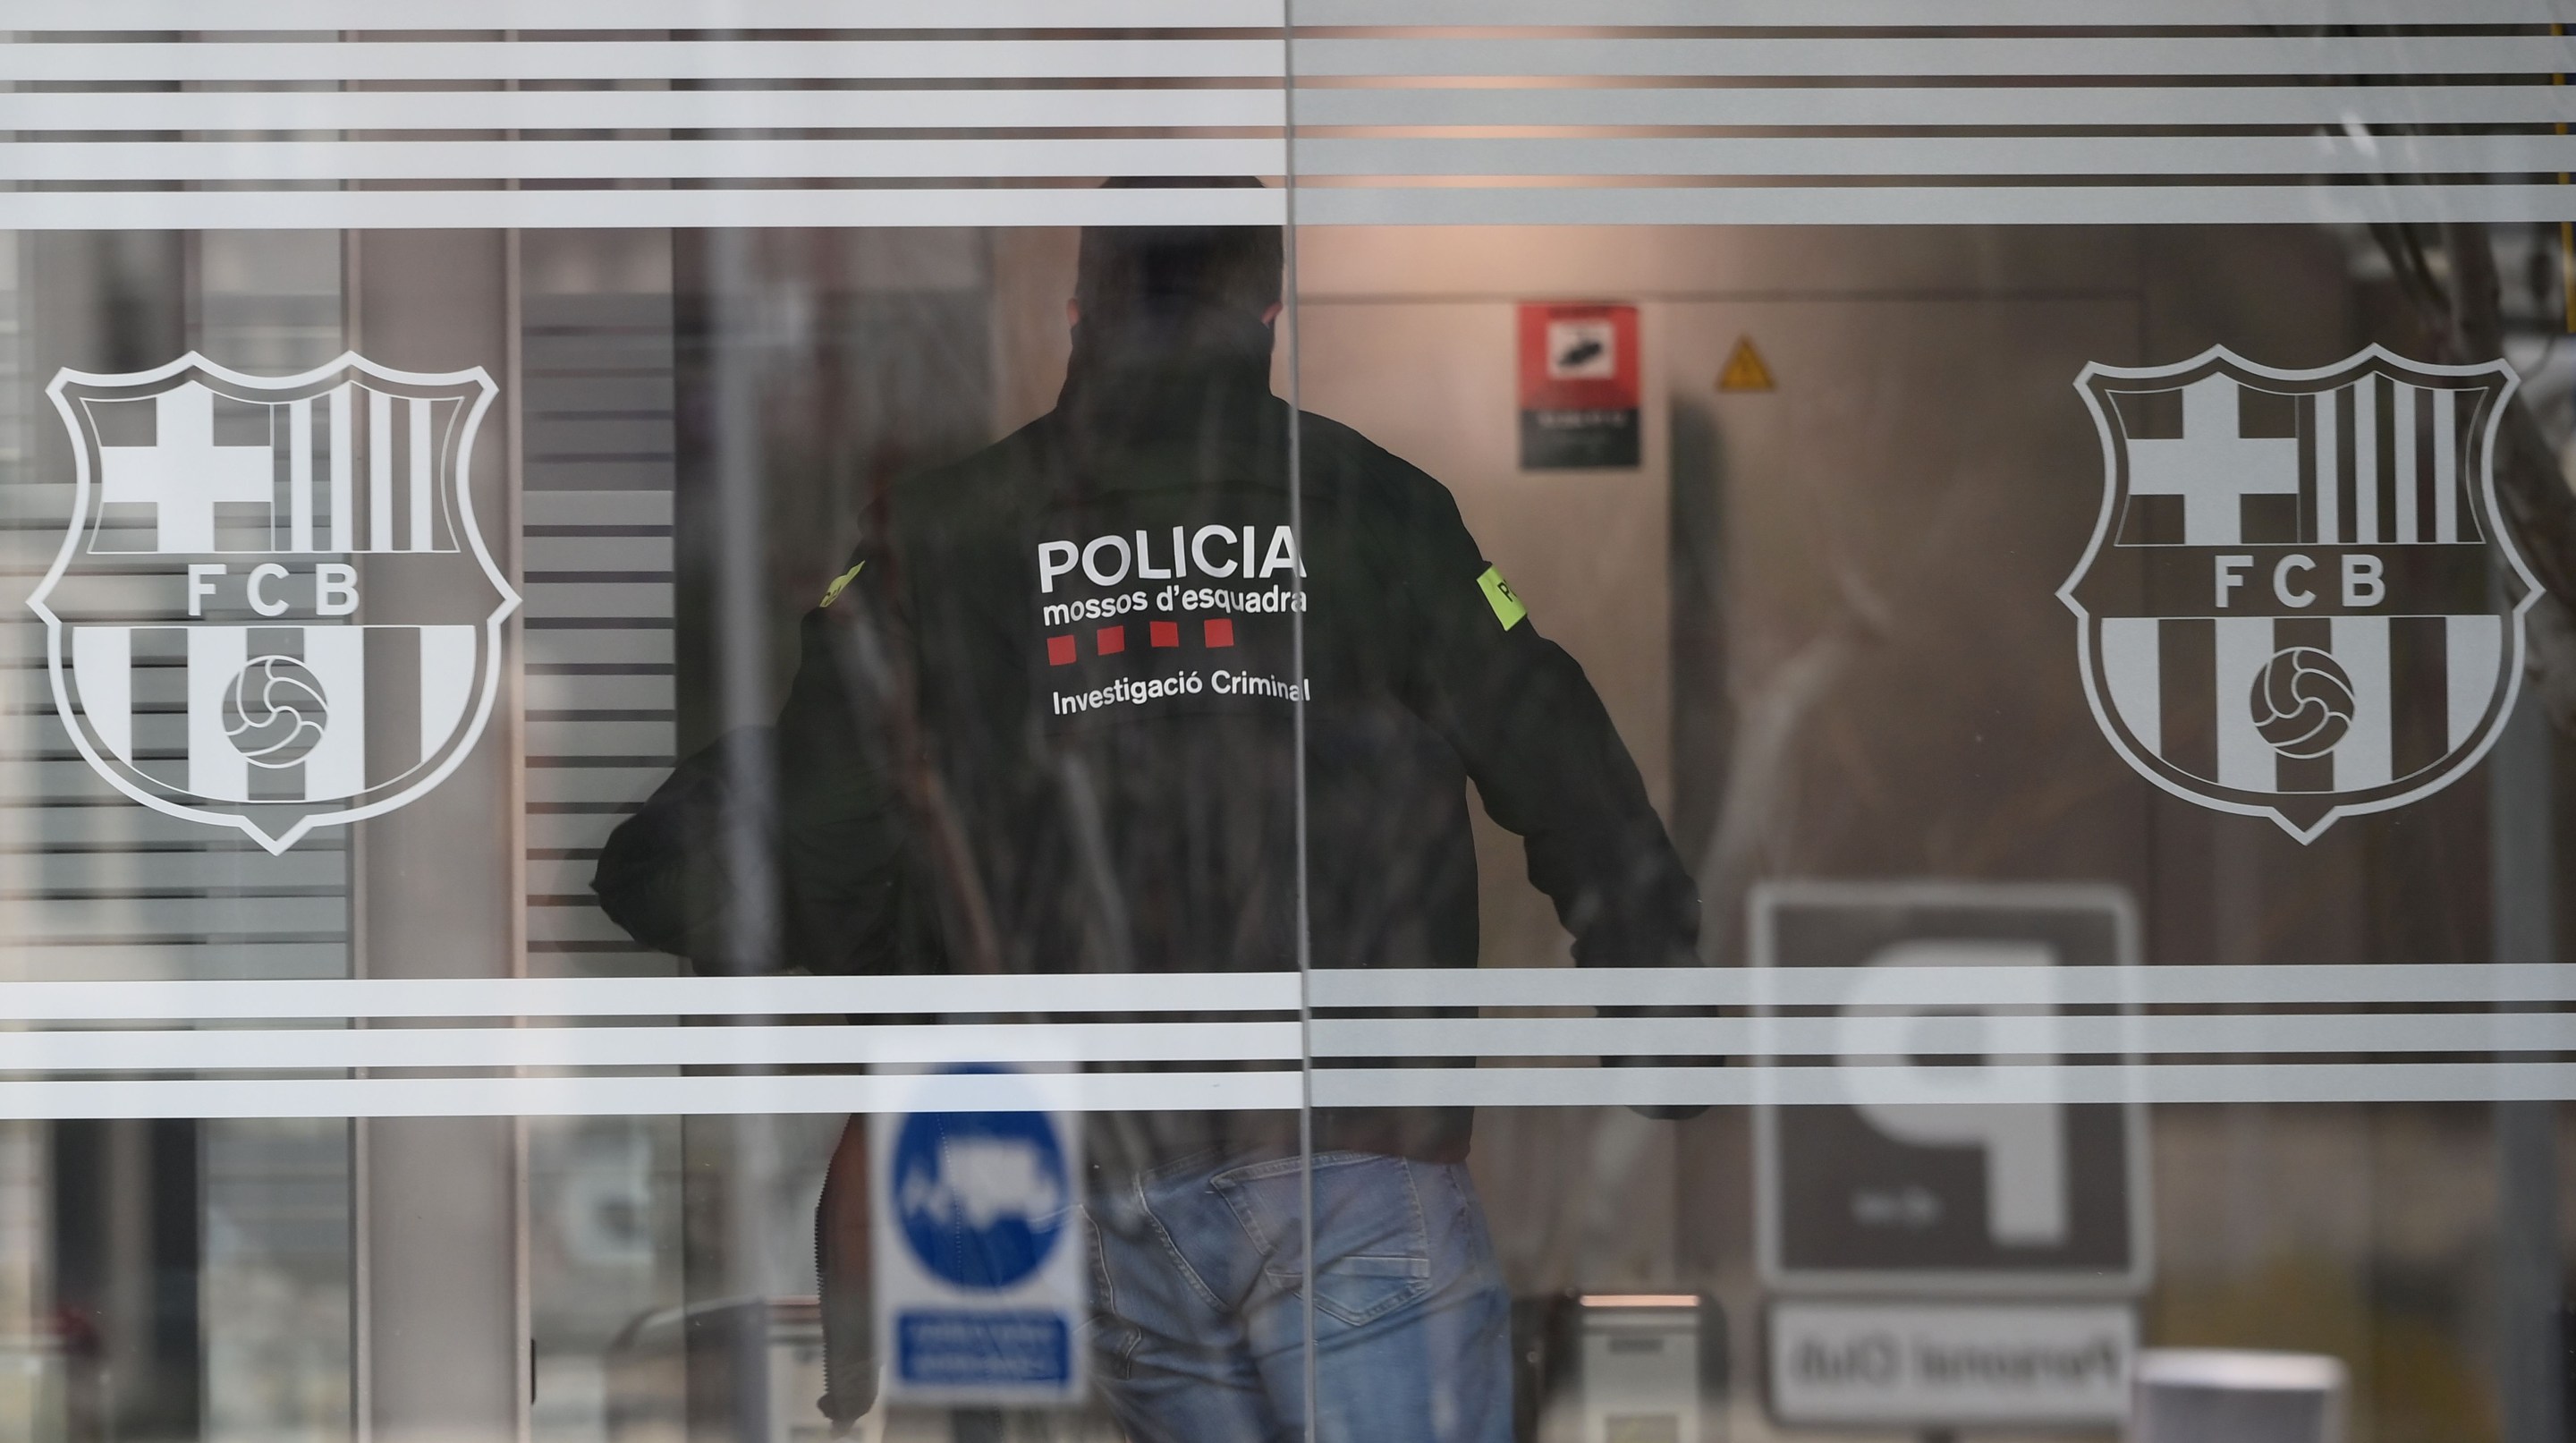 A policeman enters the offices of the Barcelona Football Club on March 01, 2021 in Barcelona during a police operation inside the building.